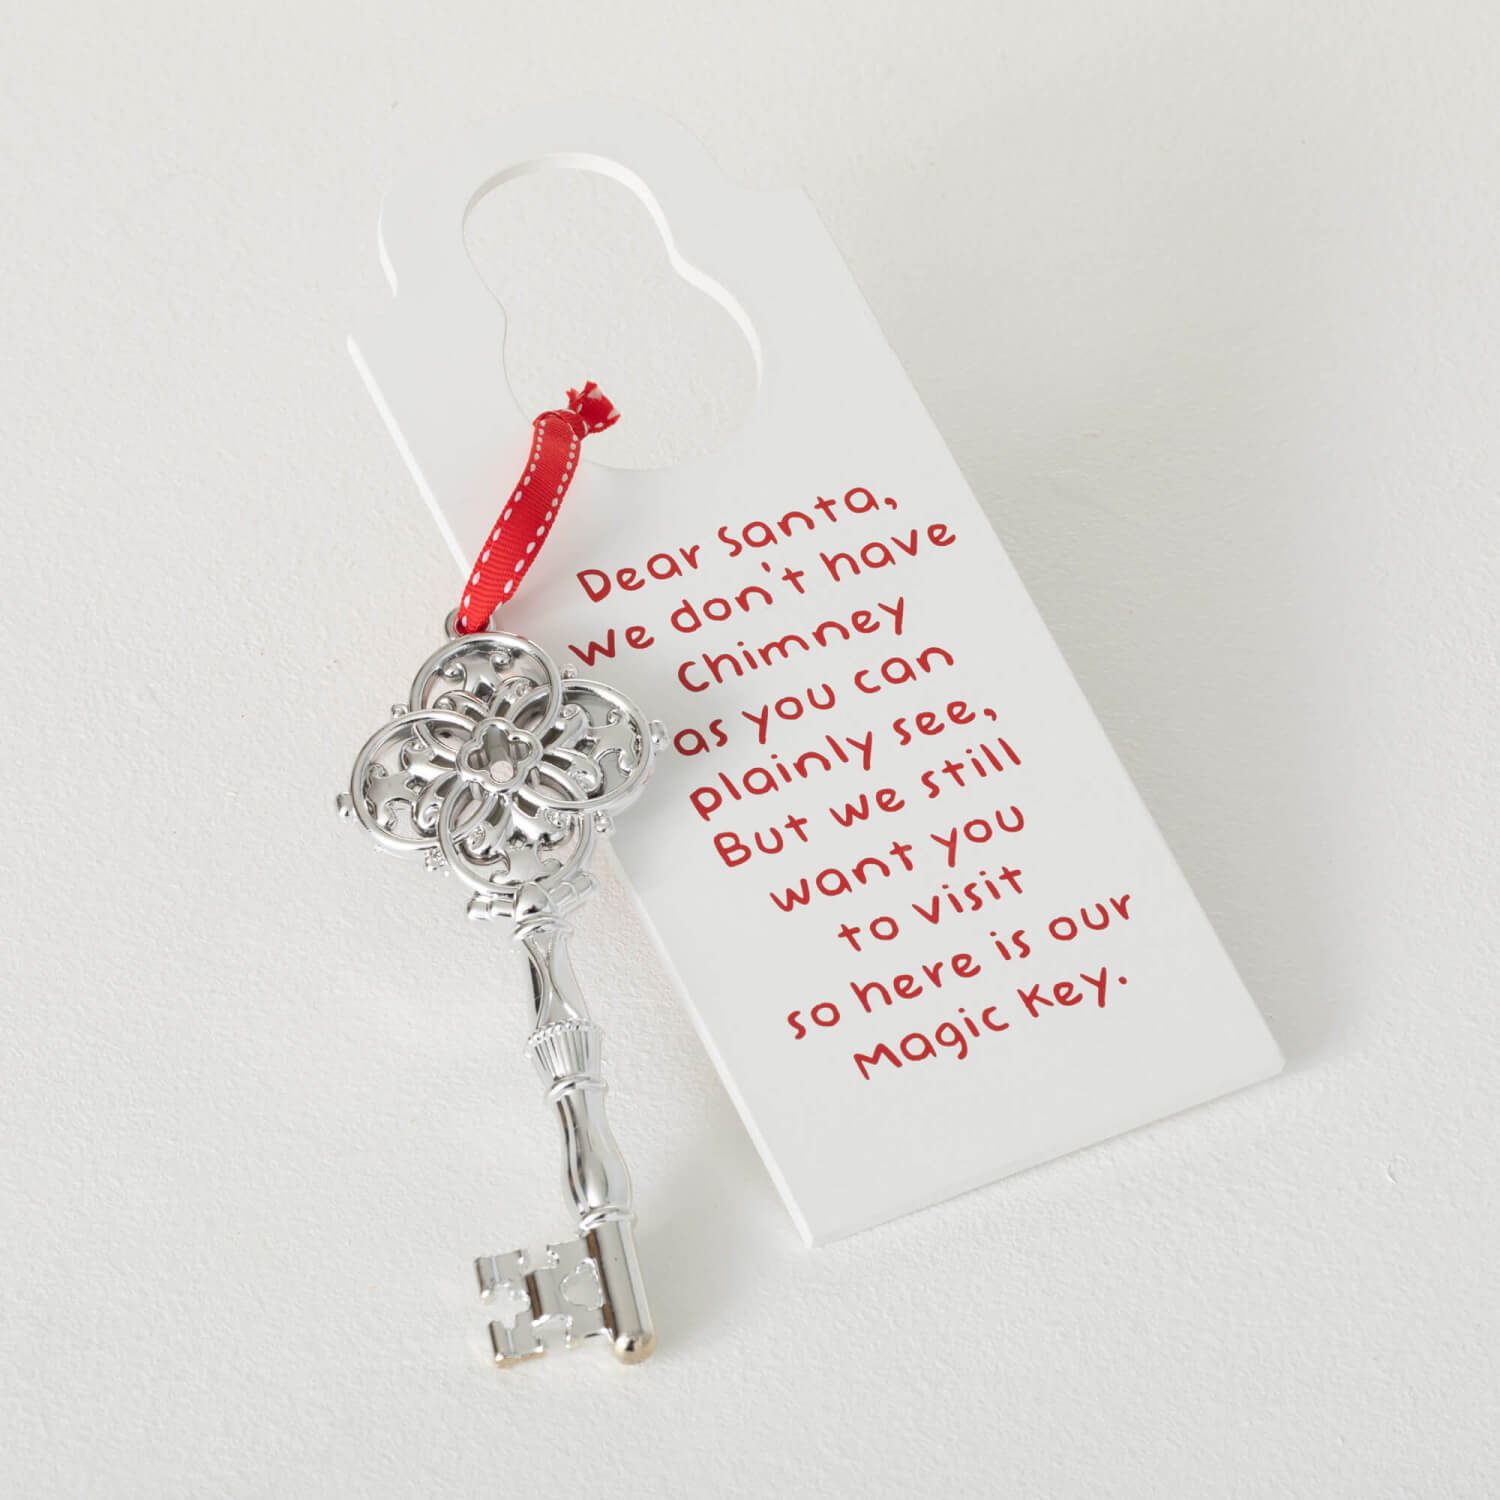 Santa's Key for House with No Chimney Ornament, Christmas Ornament, Skeleton Key Santa Key, Santa Claus Decoration,, Silver